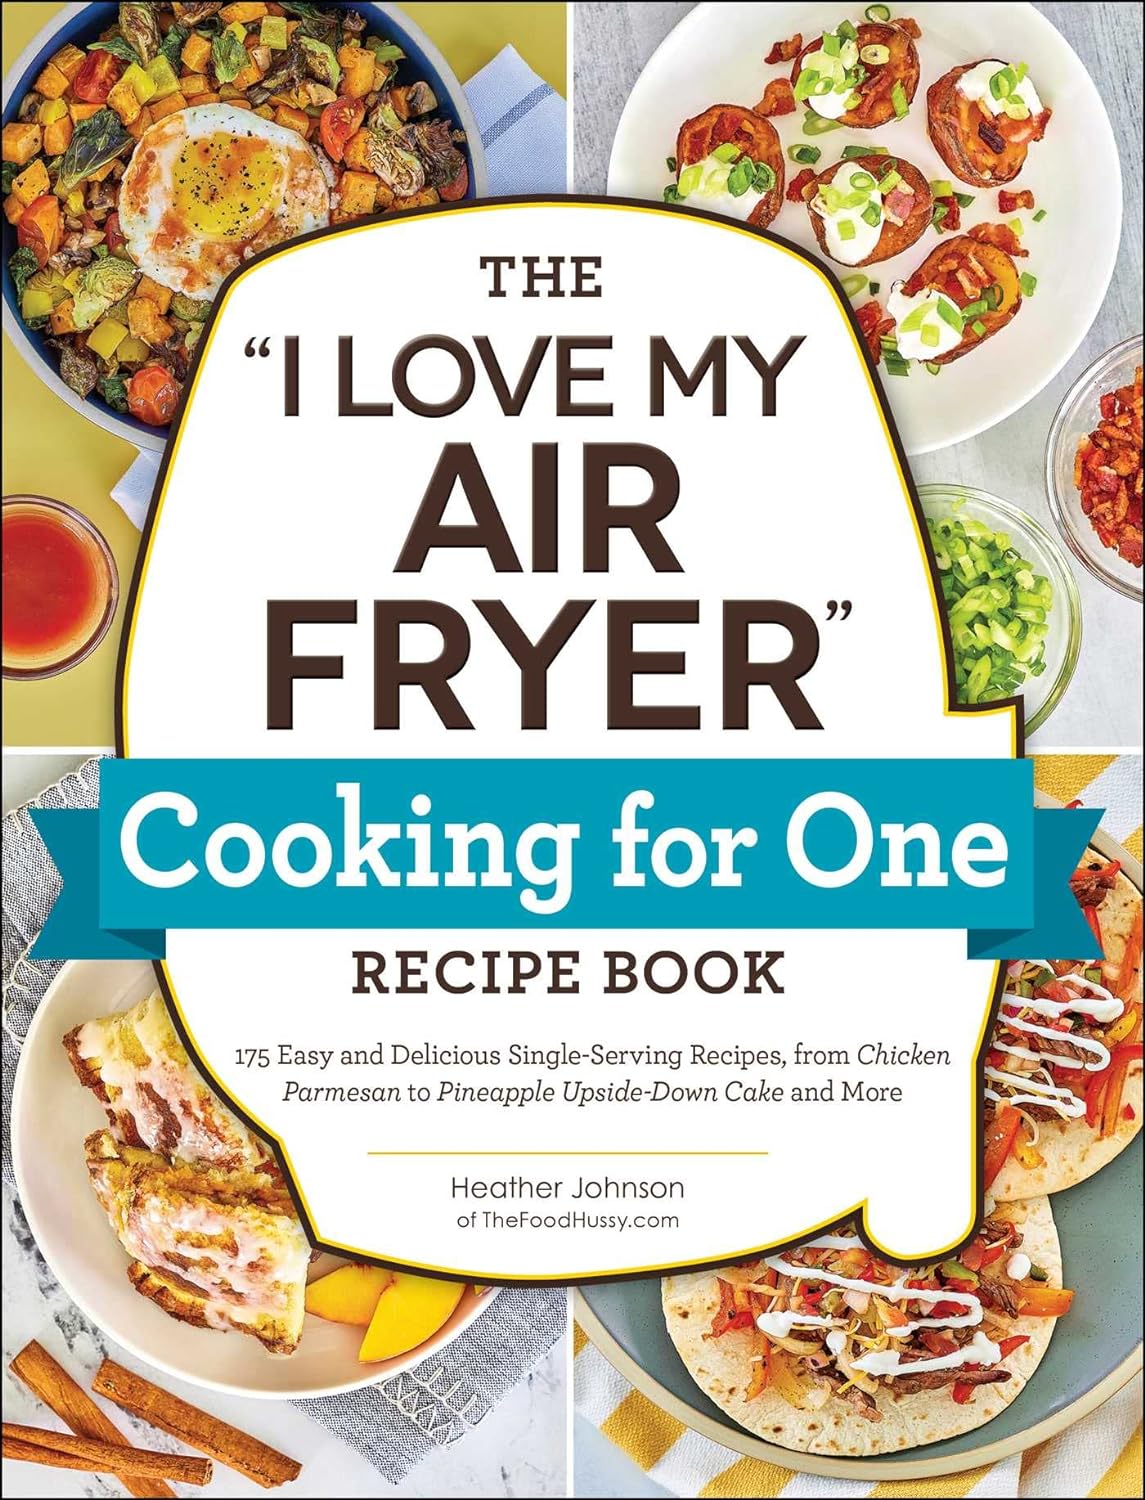 The I Love My Air Fryer Cooking for One Recipe Book: 175 Easy and Delicious Single-Serving Recipes, from Chicken Parmesan to Pineapple Upside-Down Cake and More (I Love My Cookbook Series)